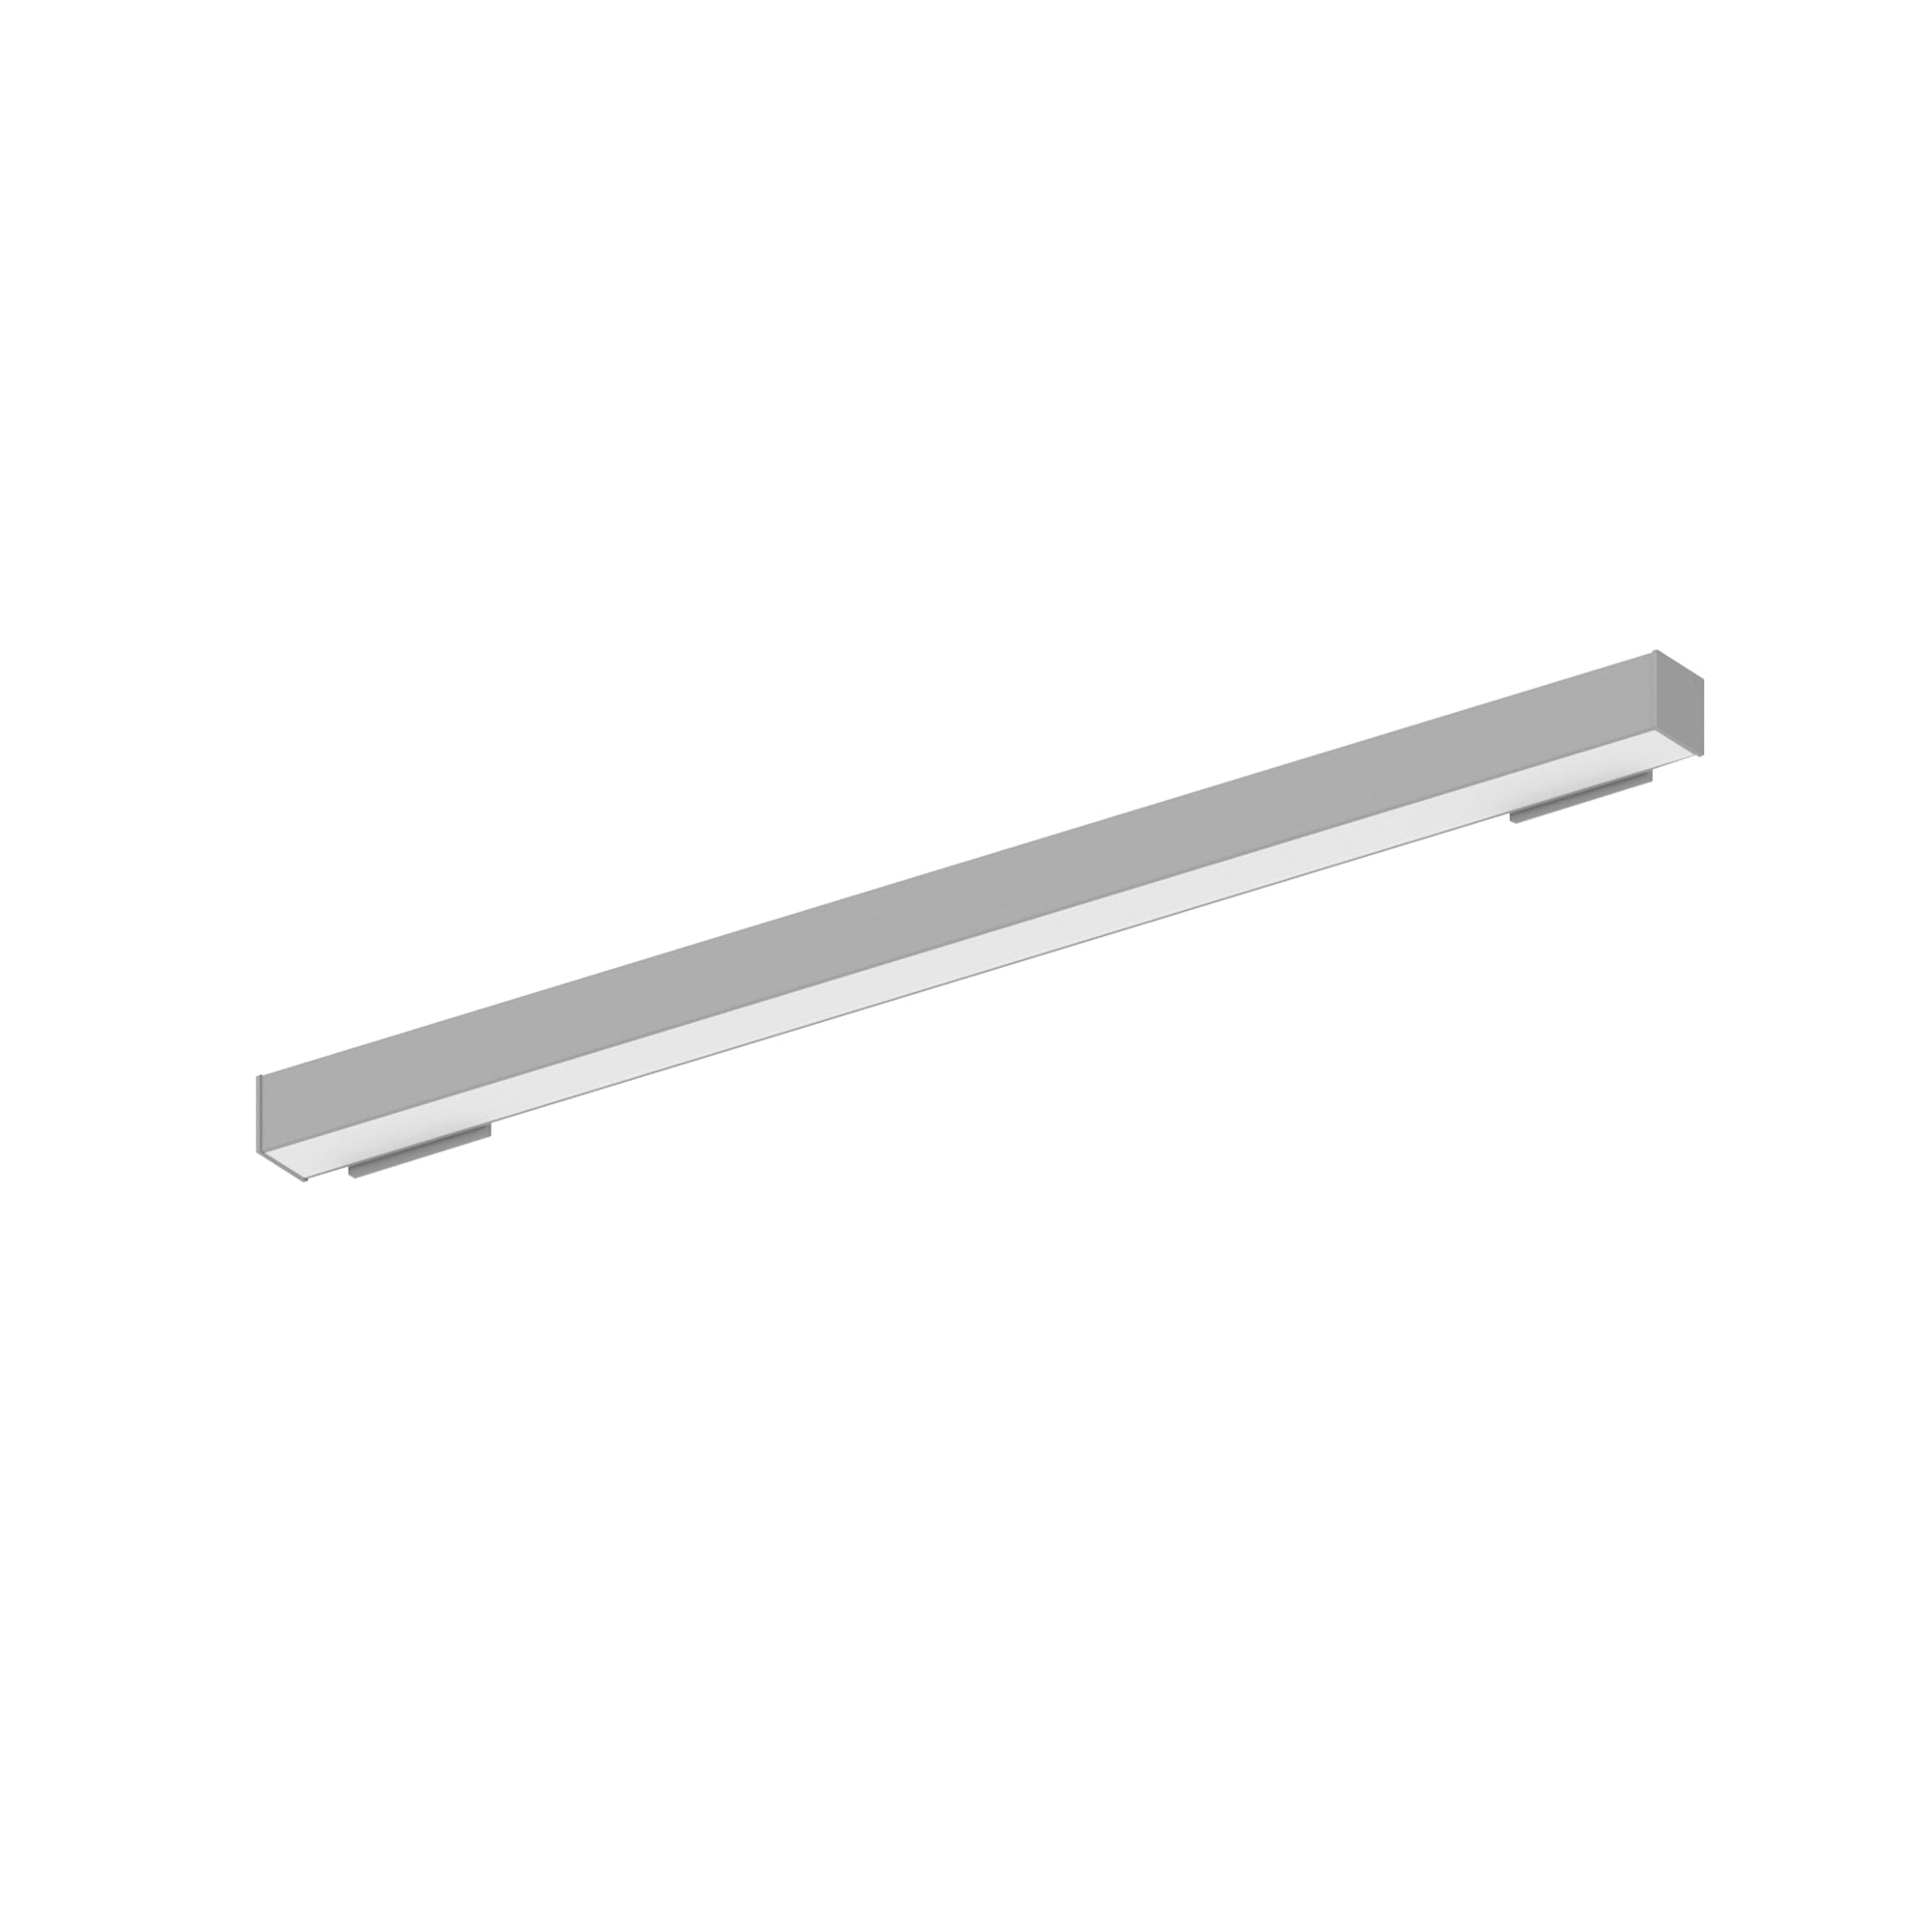 Nora Lighting NWLIN-41040A/L2P-R2 - Linear - 4' L-Line LED Wall Mount Linear, 4200lm / 4000K, 2 Inchx4 Inch Left Plate & 2 Inchx4 Inch Right Plate, Left Power Feed, Aluminum Finish